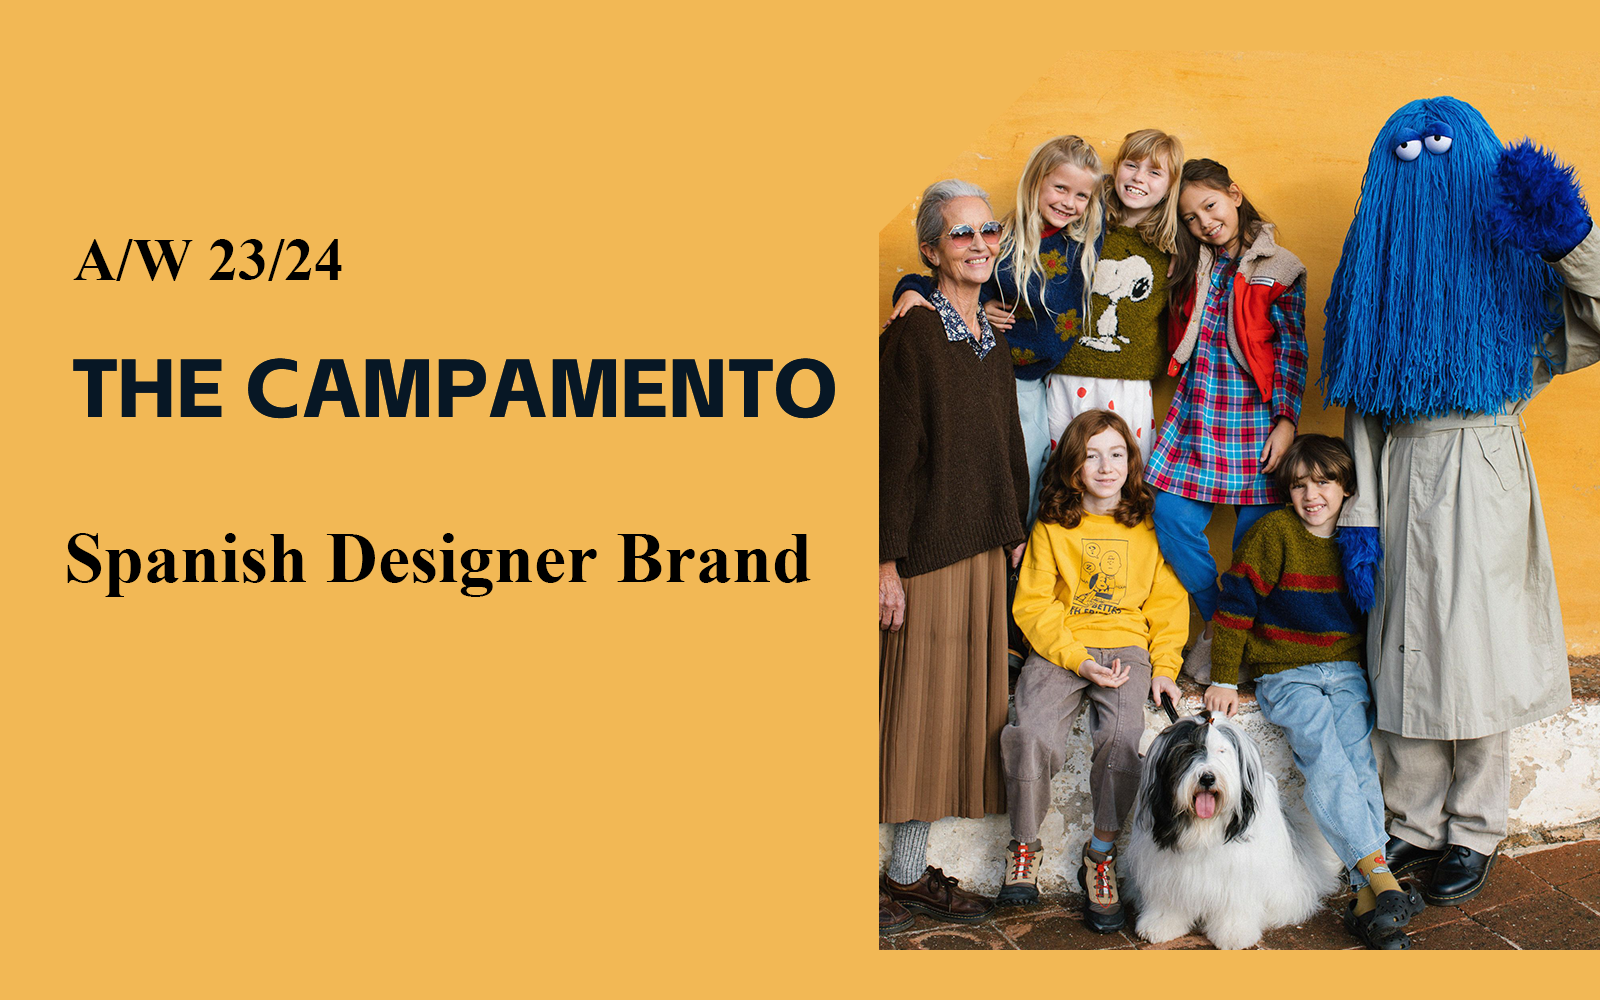 The Friends -- The Analysis of The Campamento The Spanish Designer Brand